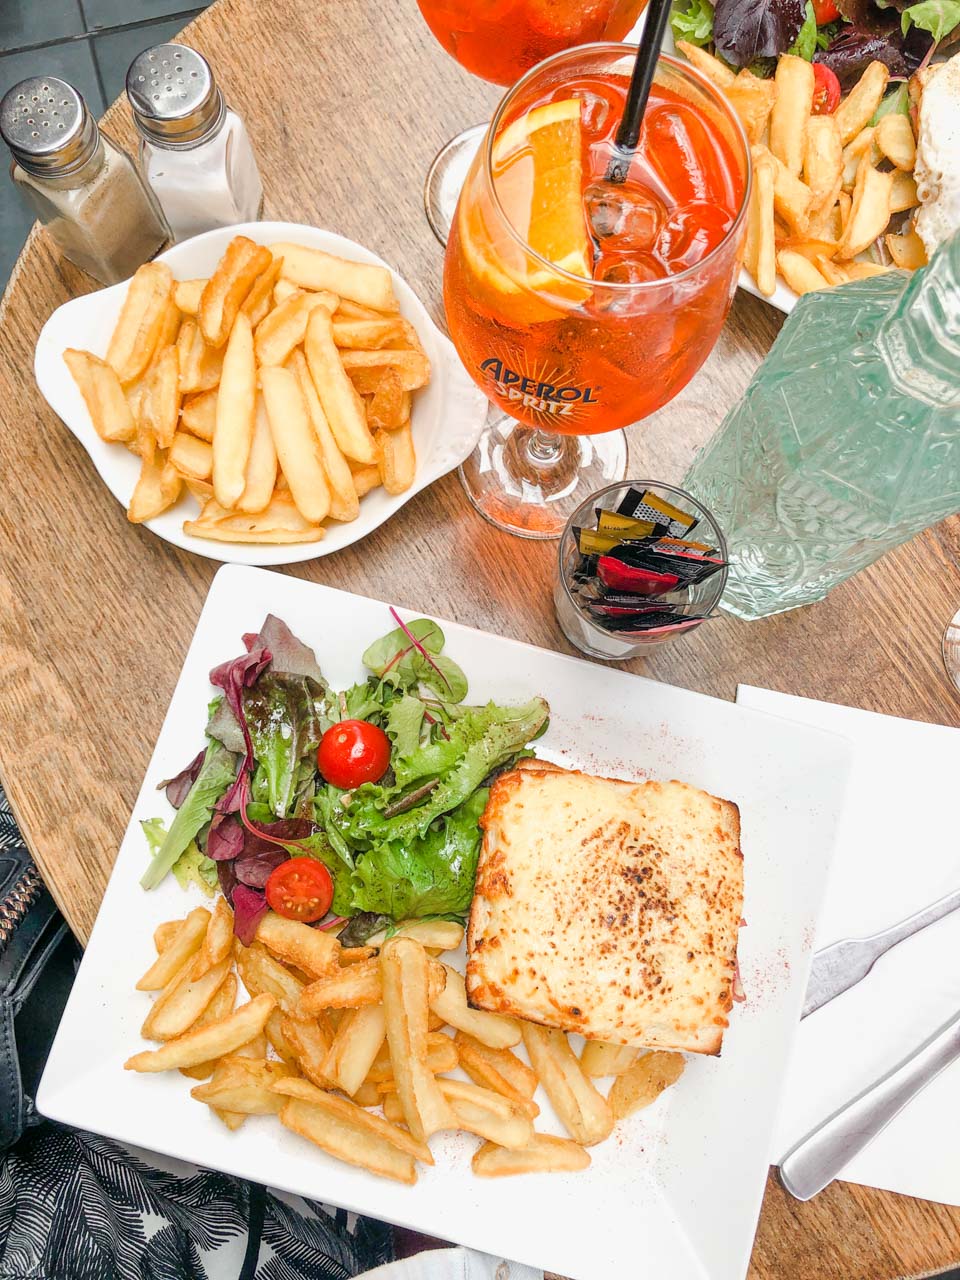 Plate of chips, a croque monsieur sandwich, a bottle of water and an Aperol Spritz on a table